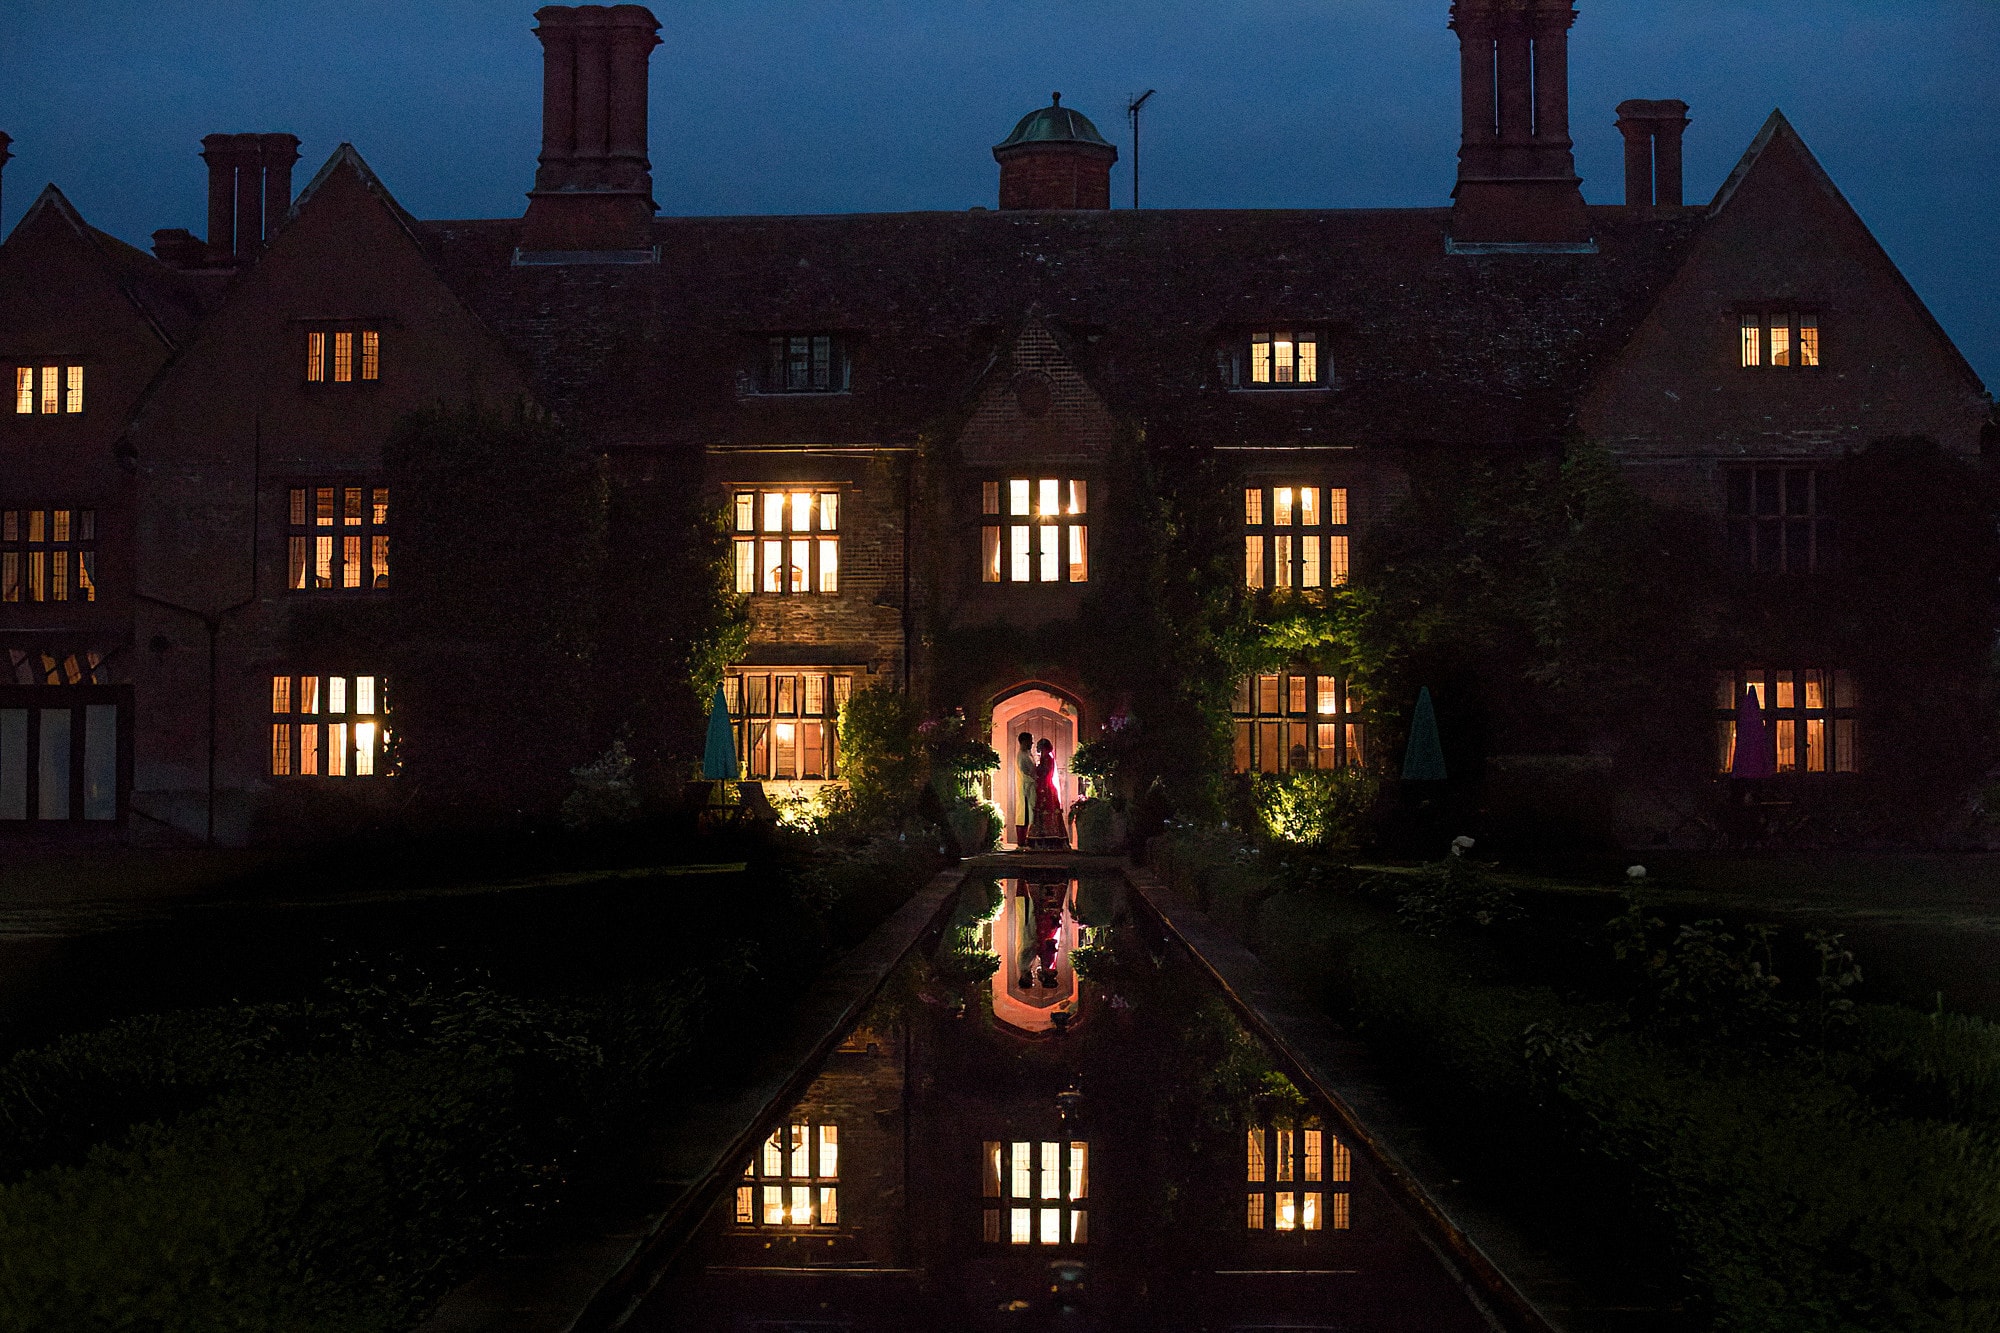 woodhall manor at night with bride and groom backlit and reflection in pond